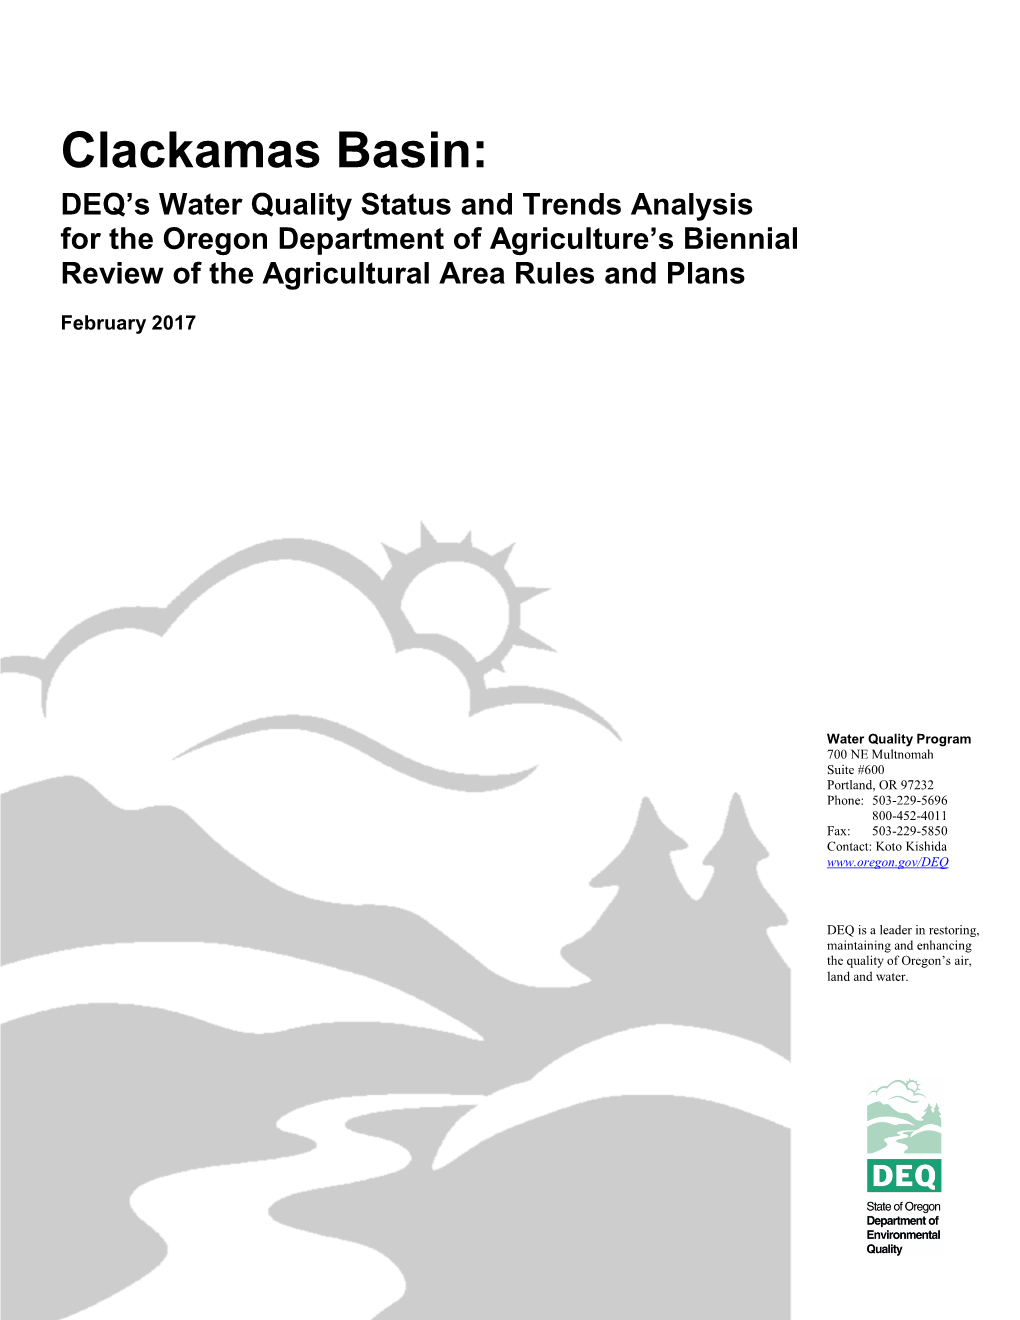 Clackamas Basin: DEQ’S Water Quality Status and Trends Analysis for the Oregon Department of Agriculture’S Biennial Review of the Agricultural Area Rules and Plans